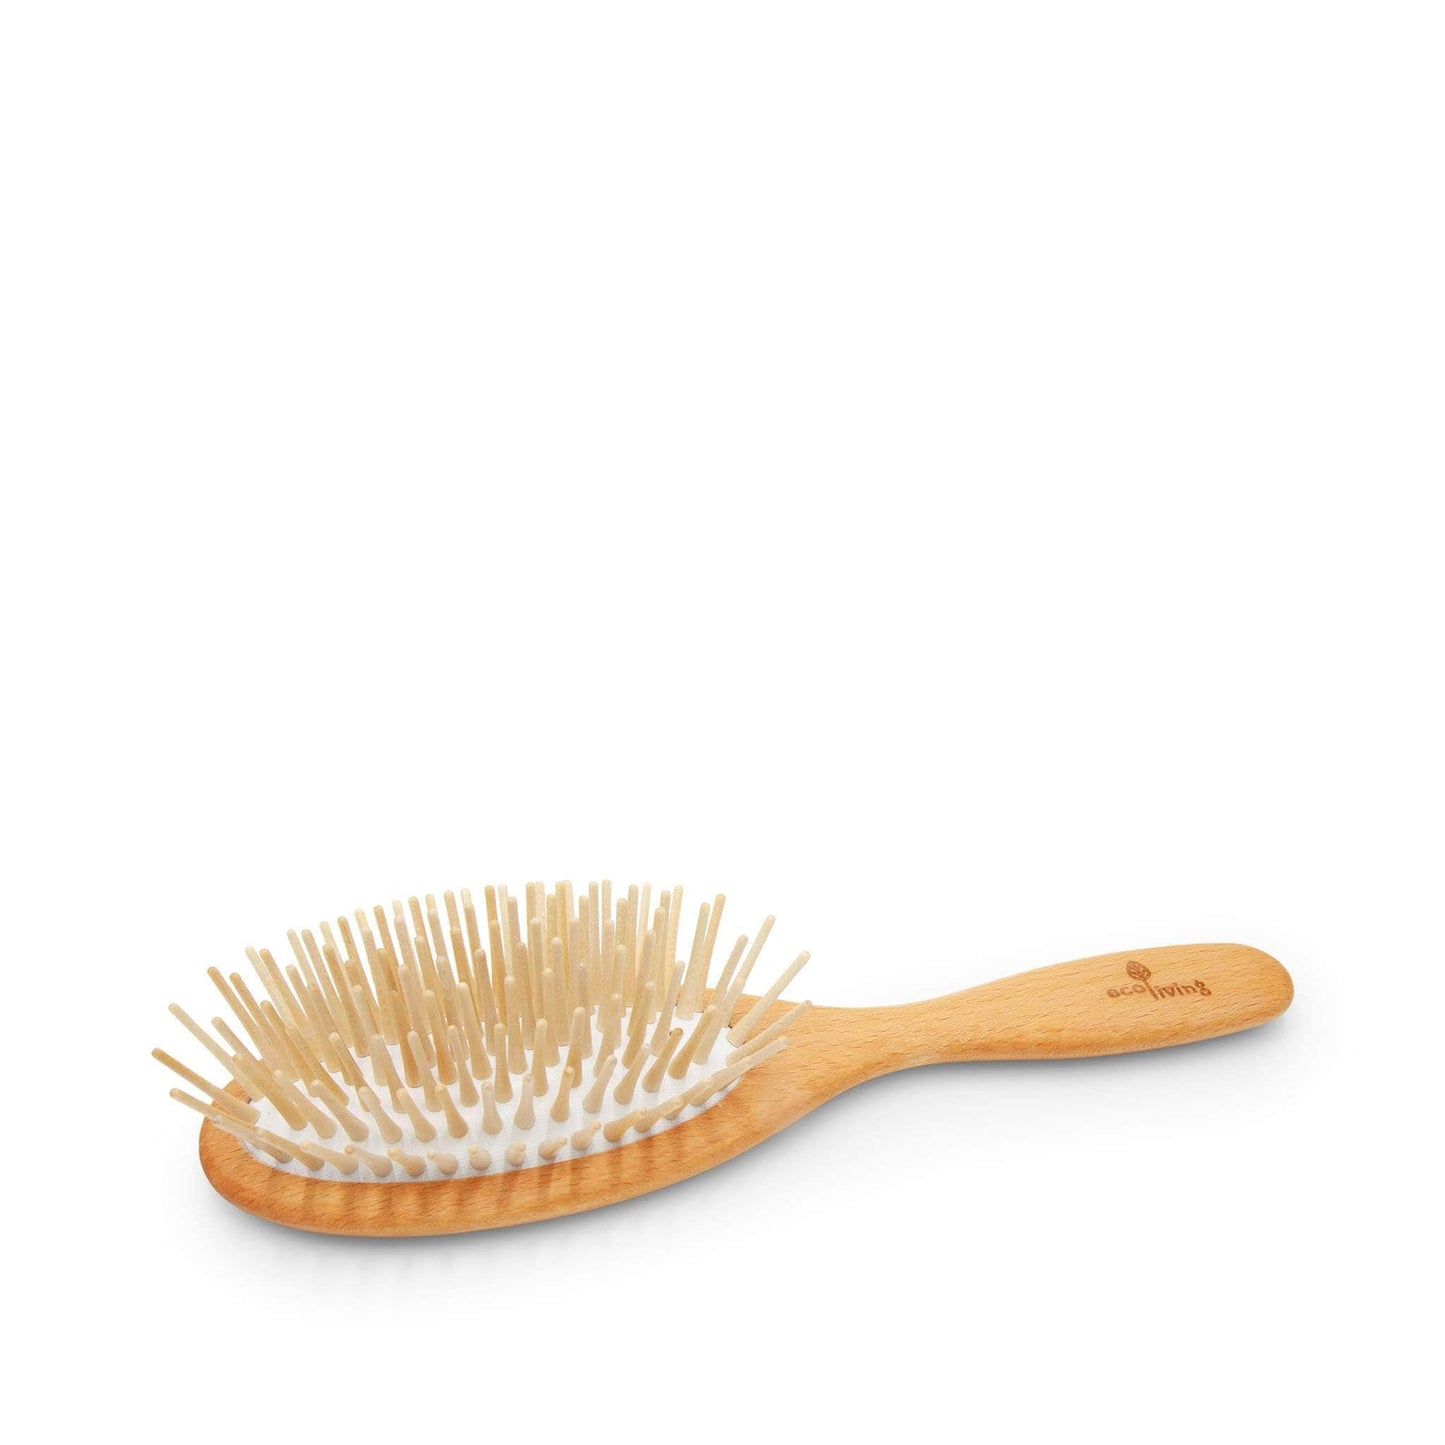 ecoLiving Hair Accessories Wooden Hairbrush with Extra Long Wooden Pins